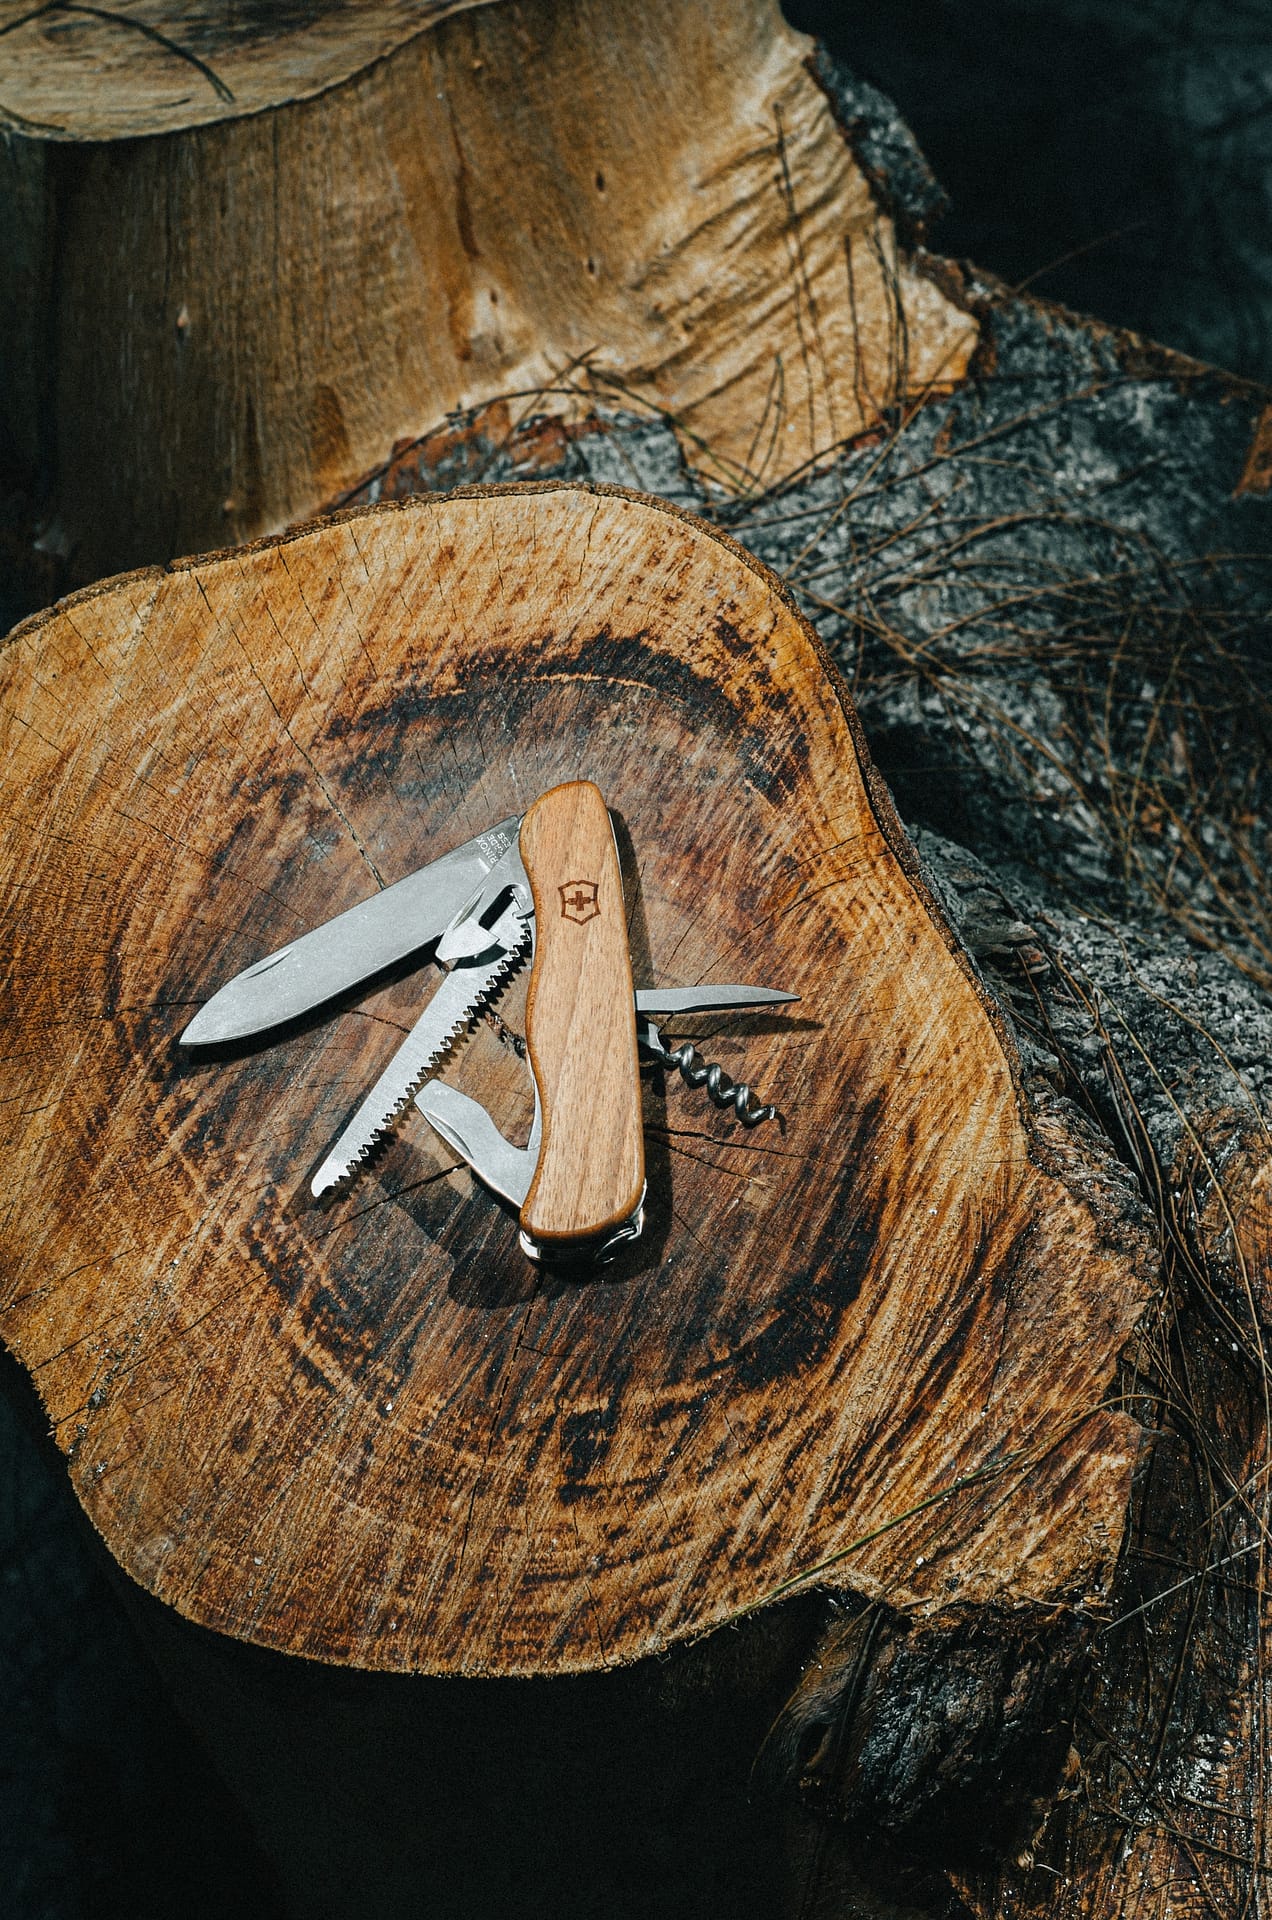 bring a multi-tool as one of your essential tools for hiking